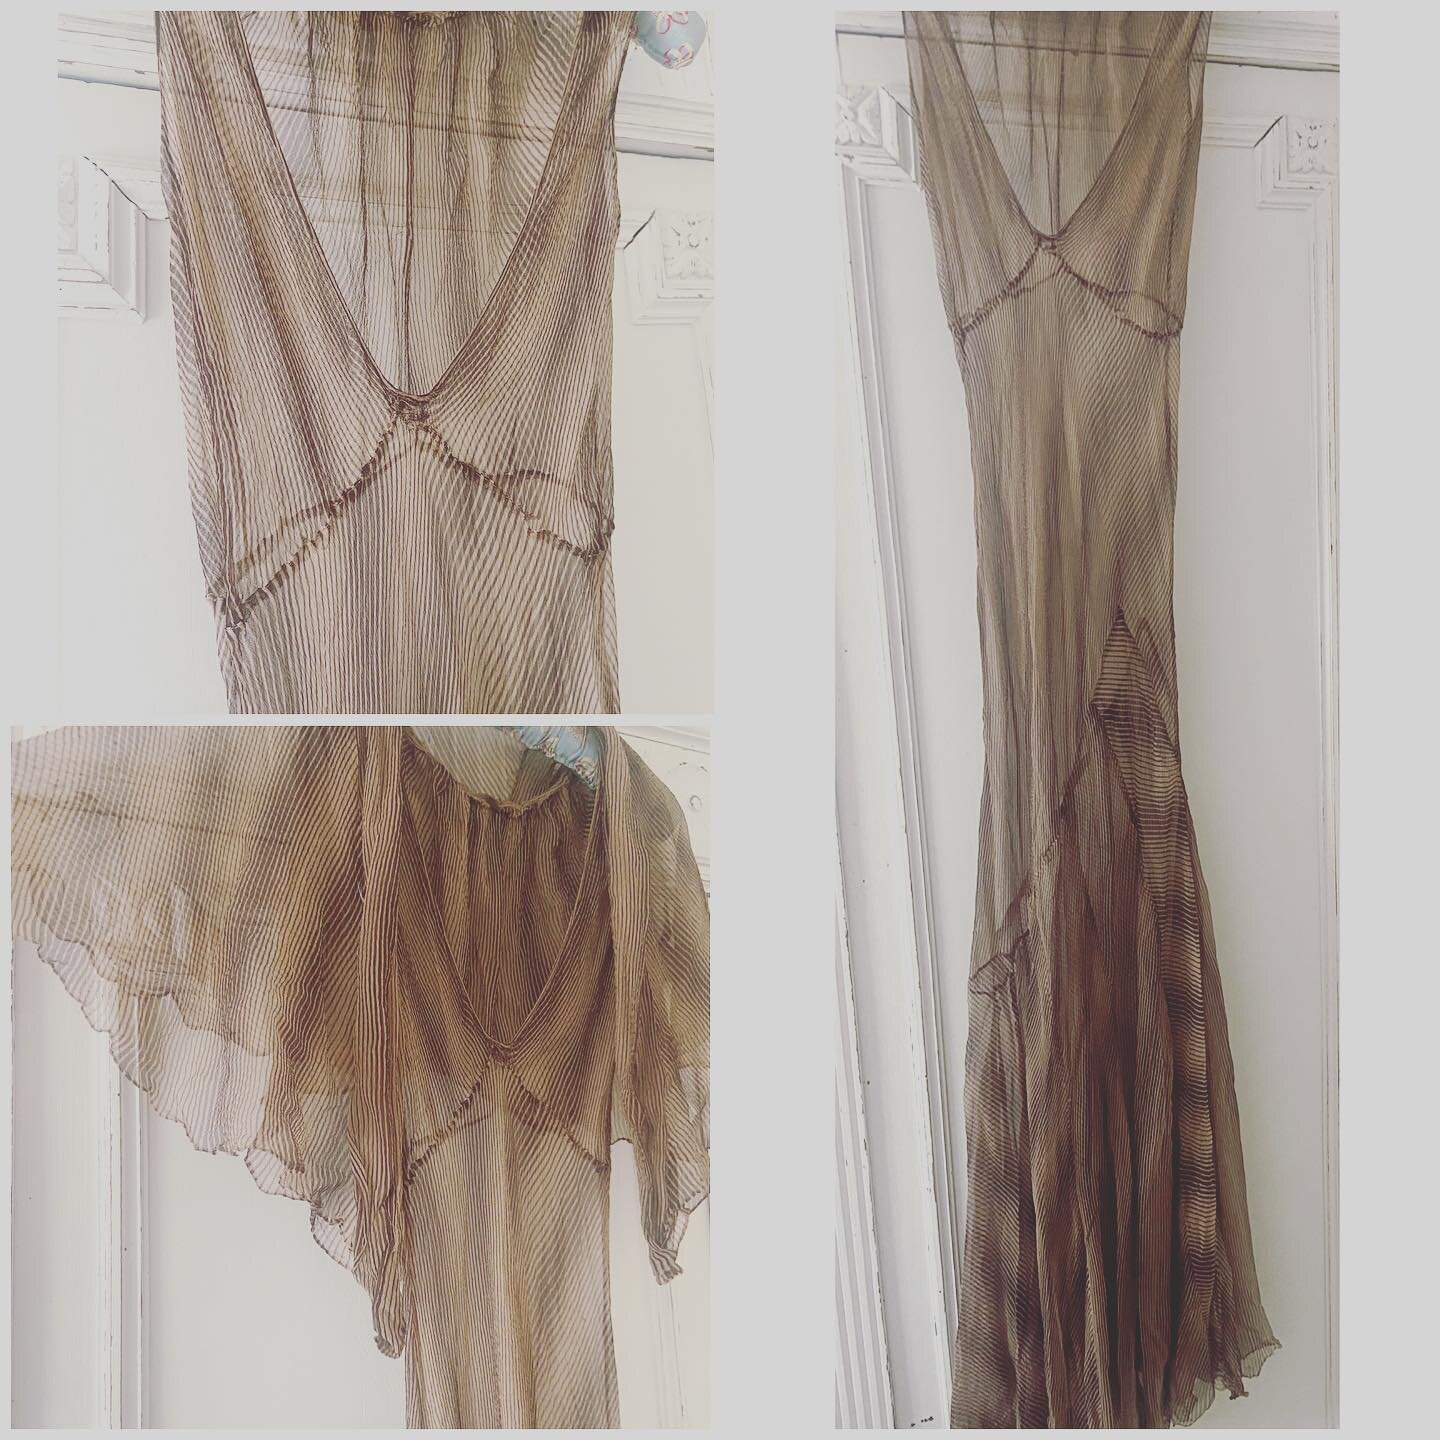 This 1930s sheer silk chiffon dress with little flutter sleeve caplet is coming soon✨in perfect condition ✨🤍
.
.
.
.
.
.
#1930s #1930sfashion #1930sdress #1920s #frome #vintagefashion #vintage #antiqueclothing #antiquetextiles #vintageshop 🤍✨